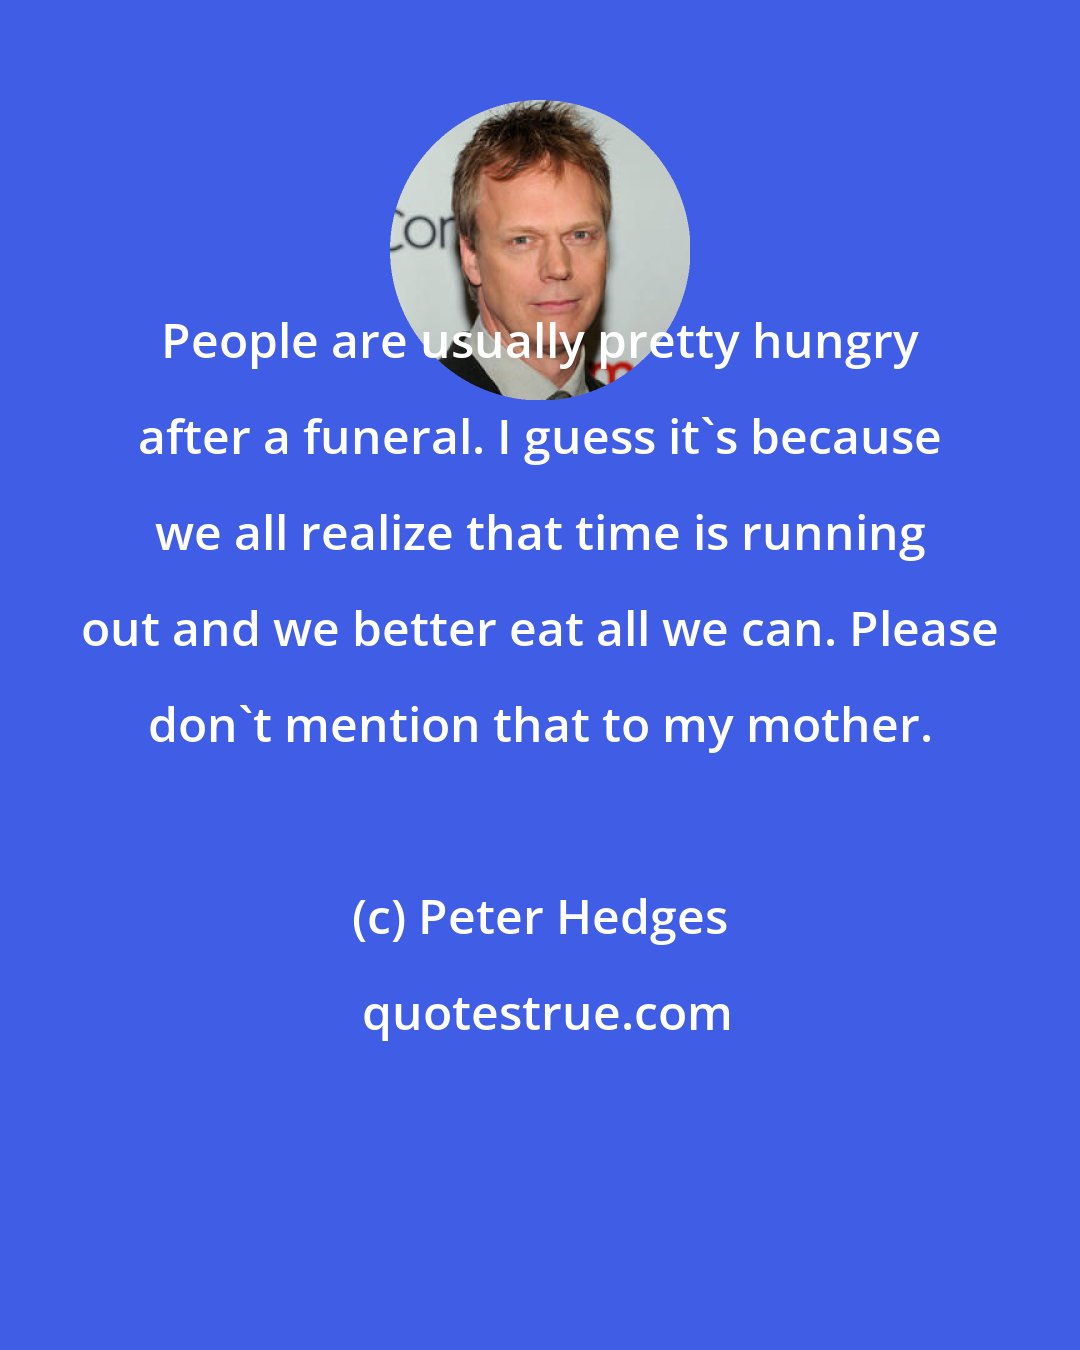 Peter Hedges: People are usually pretty hungry after a funeral. I guess it's because we all realize that time is running out and we better eat all we can. Please don't mention that to my mother.